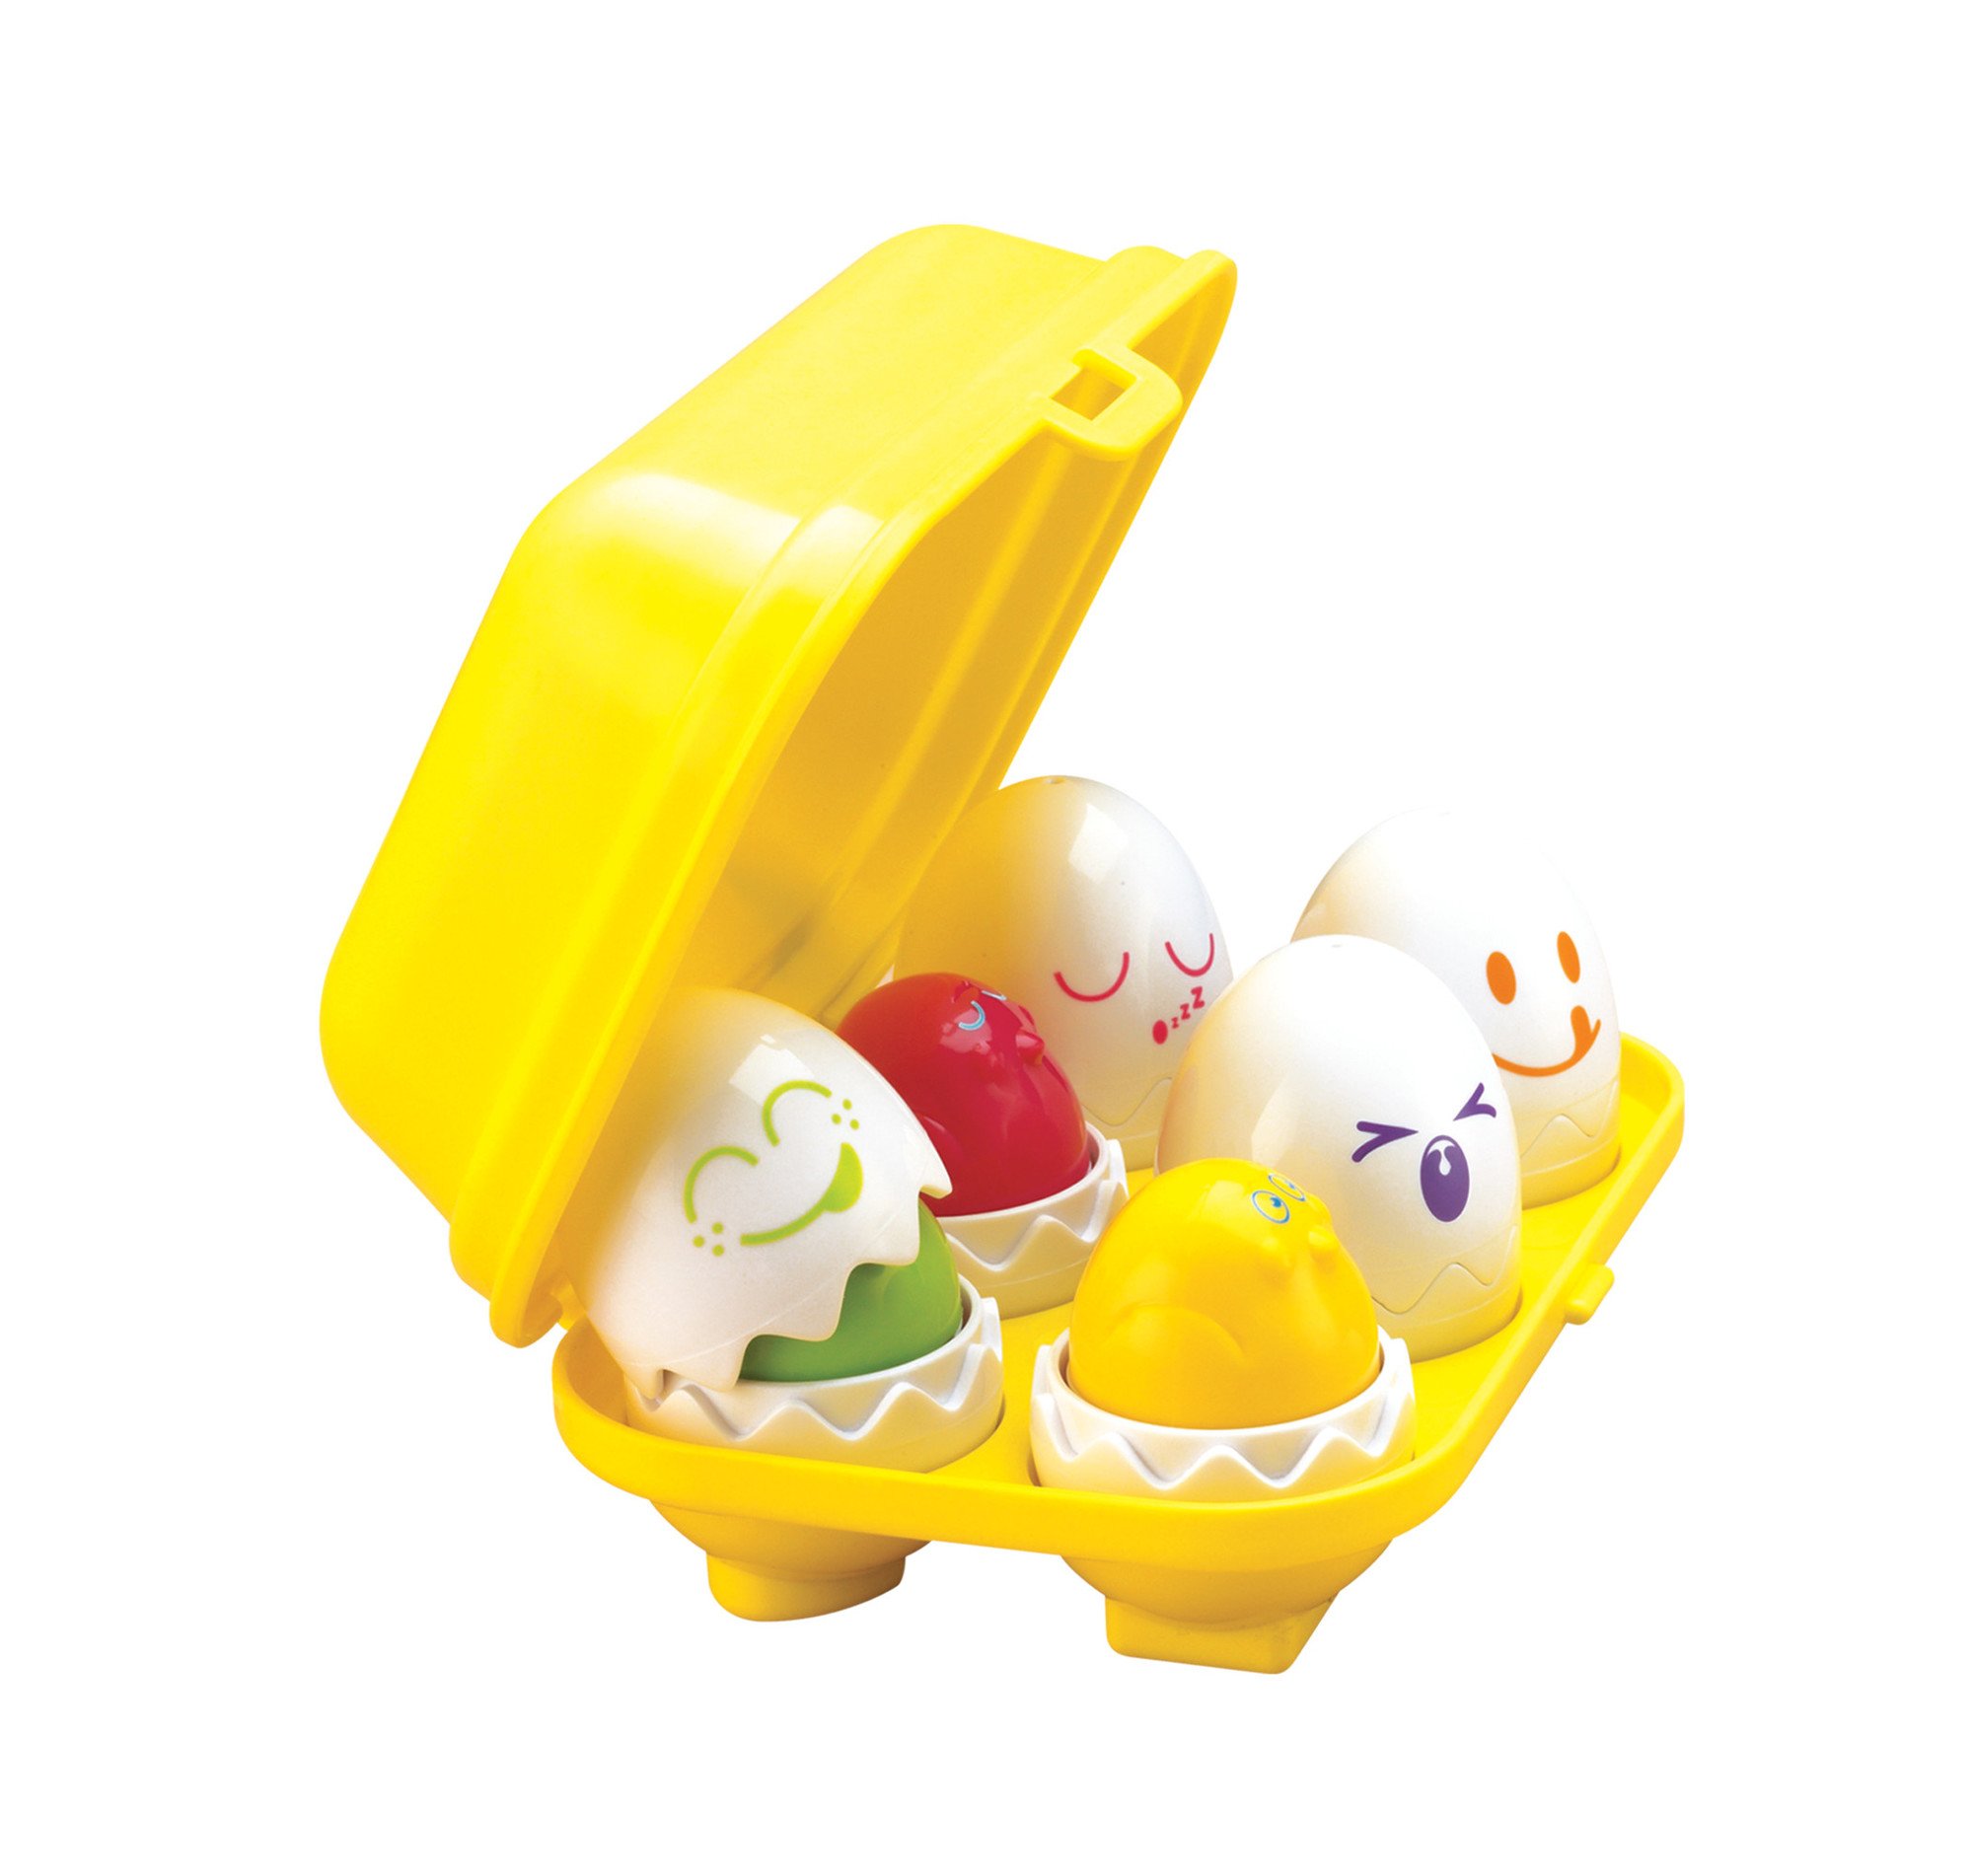 Toomies Hide & Squeak Easter Eggs $9.99 + Free Shipping w/ Prime or on $35+